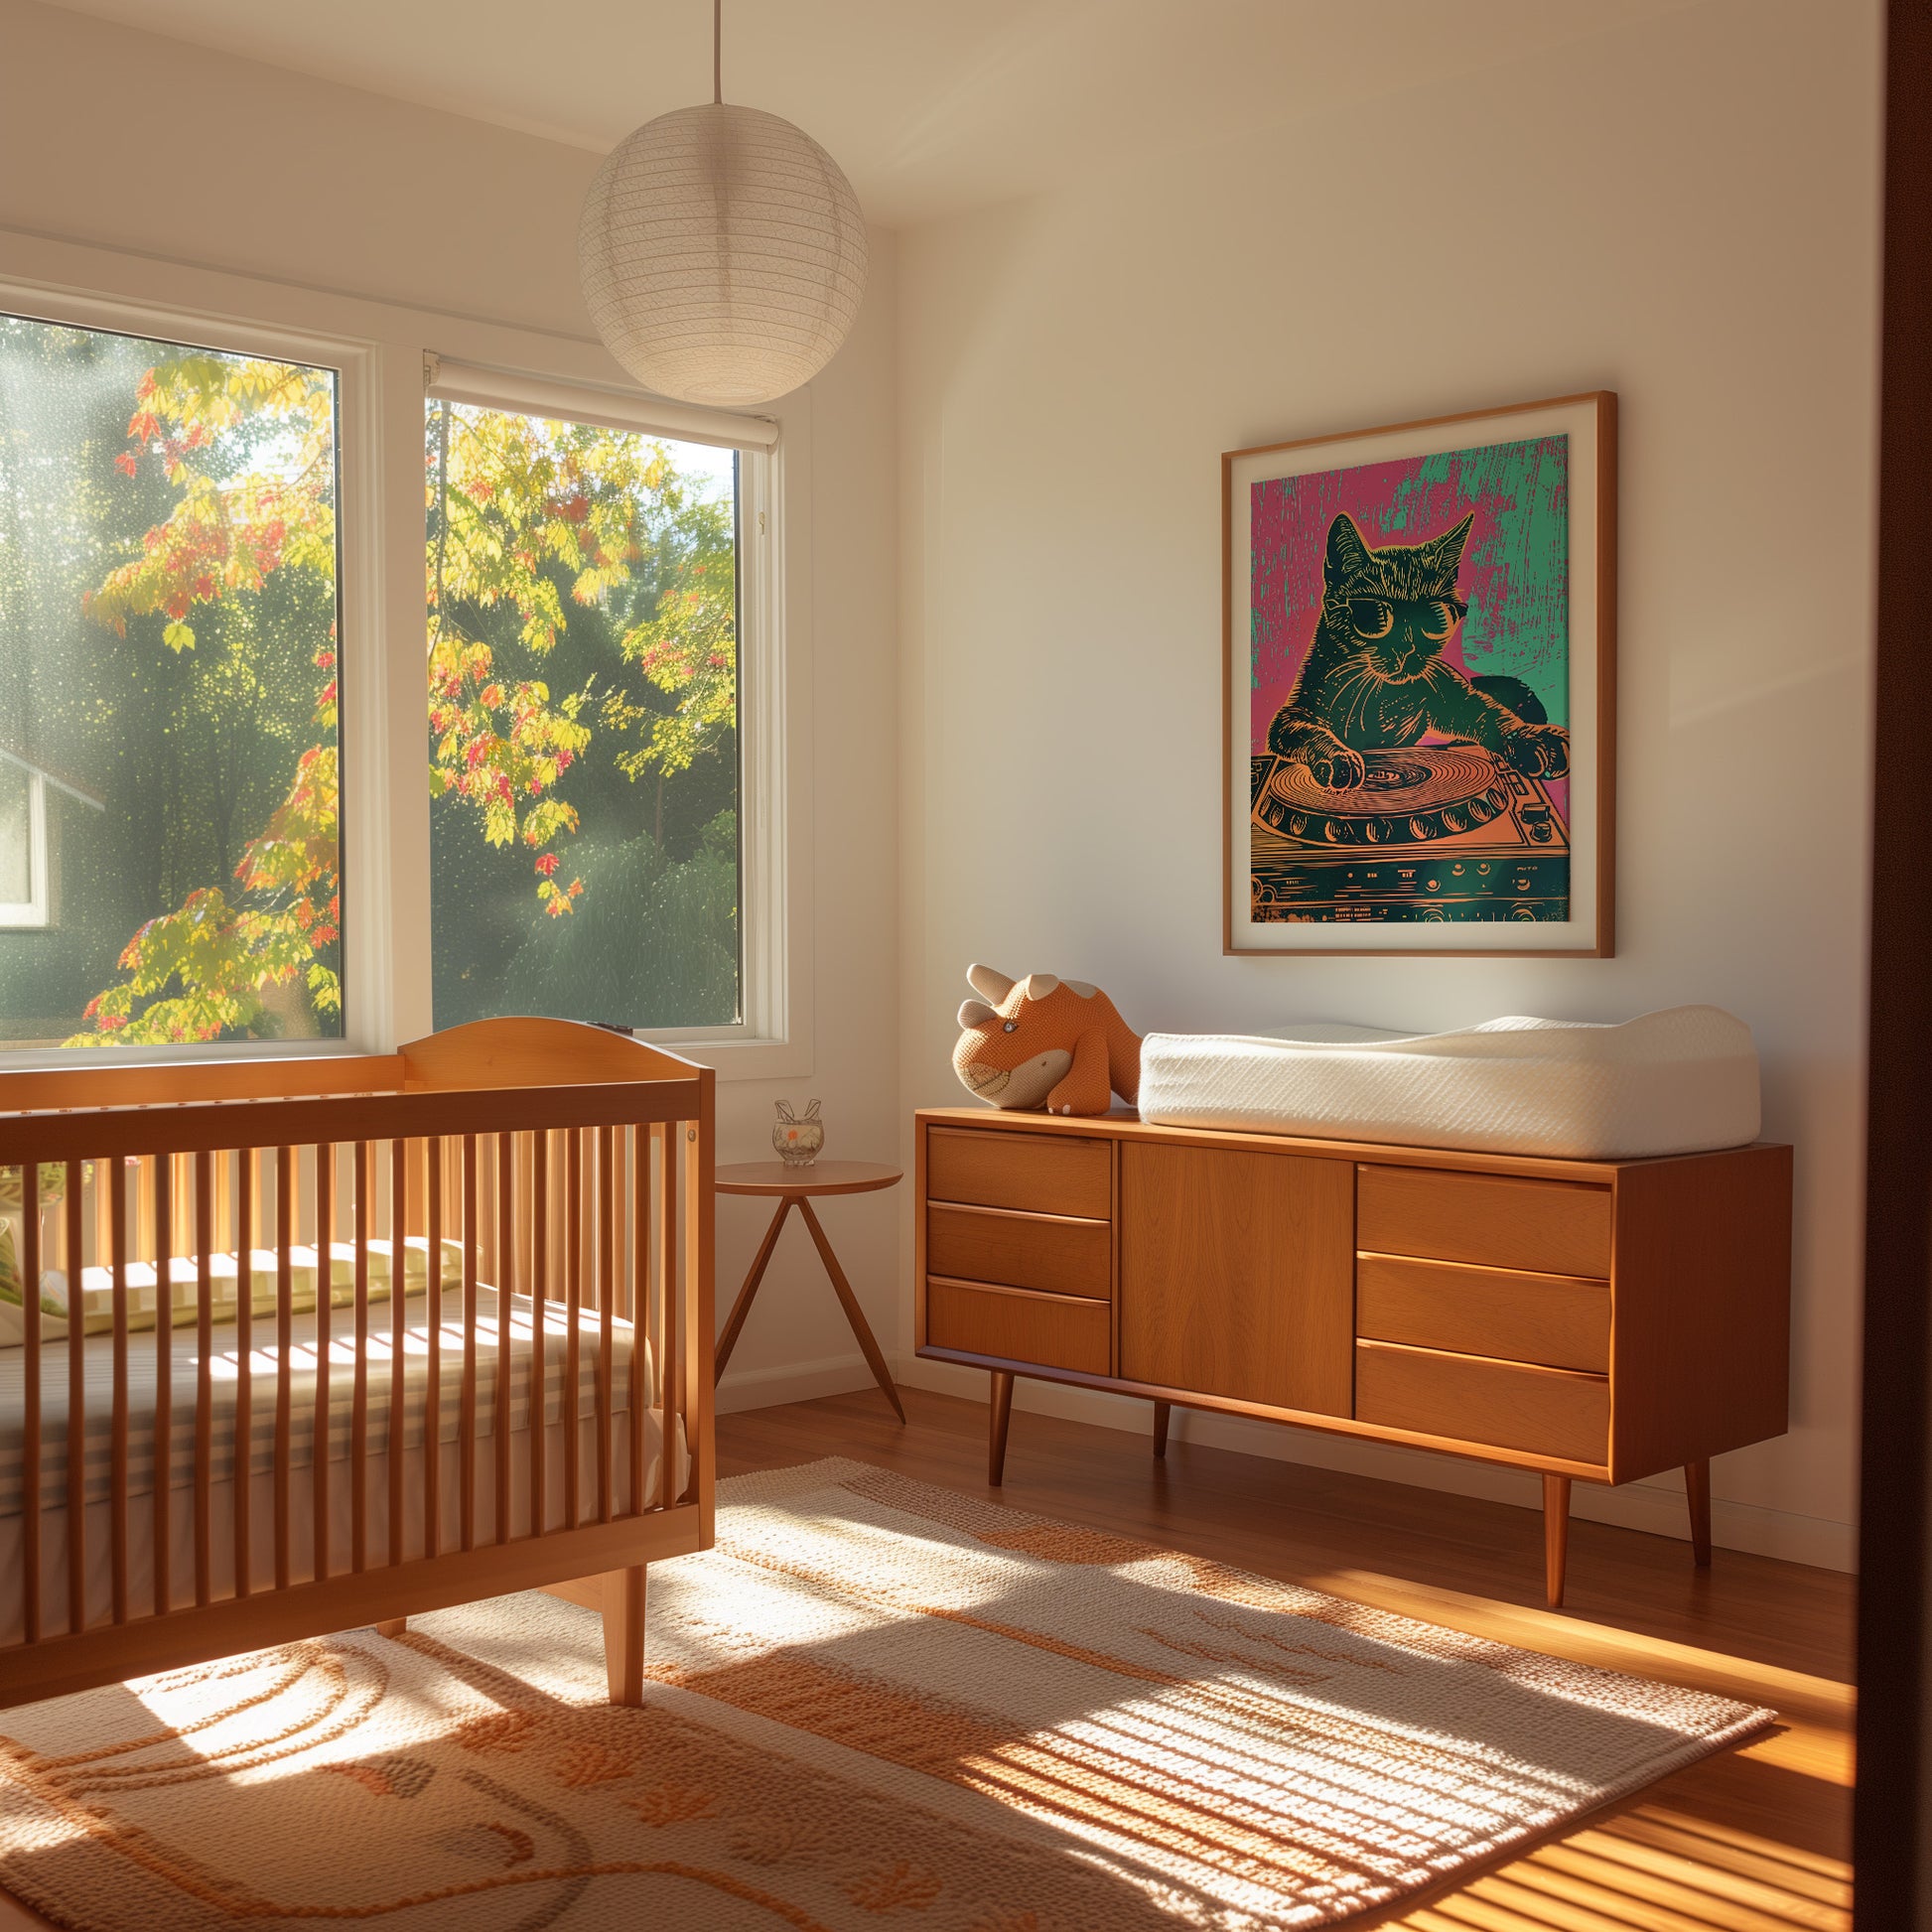 Sunny bedroom with a wooden bed, dresser, colorful artwork, and autumn trees visible outside.